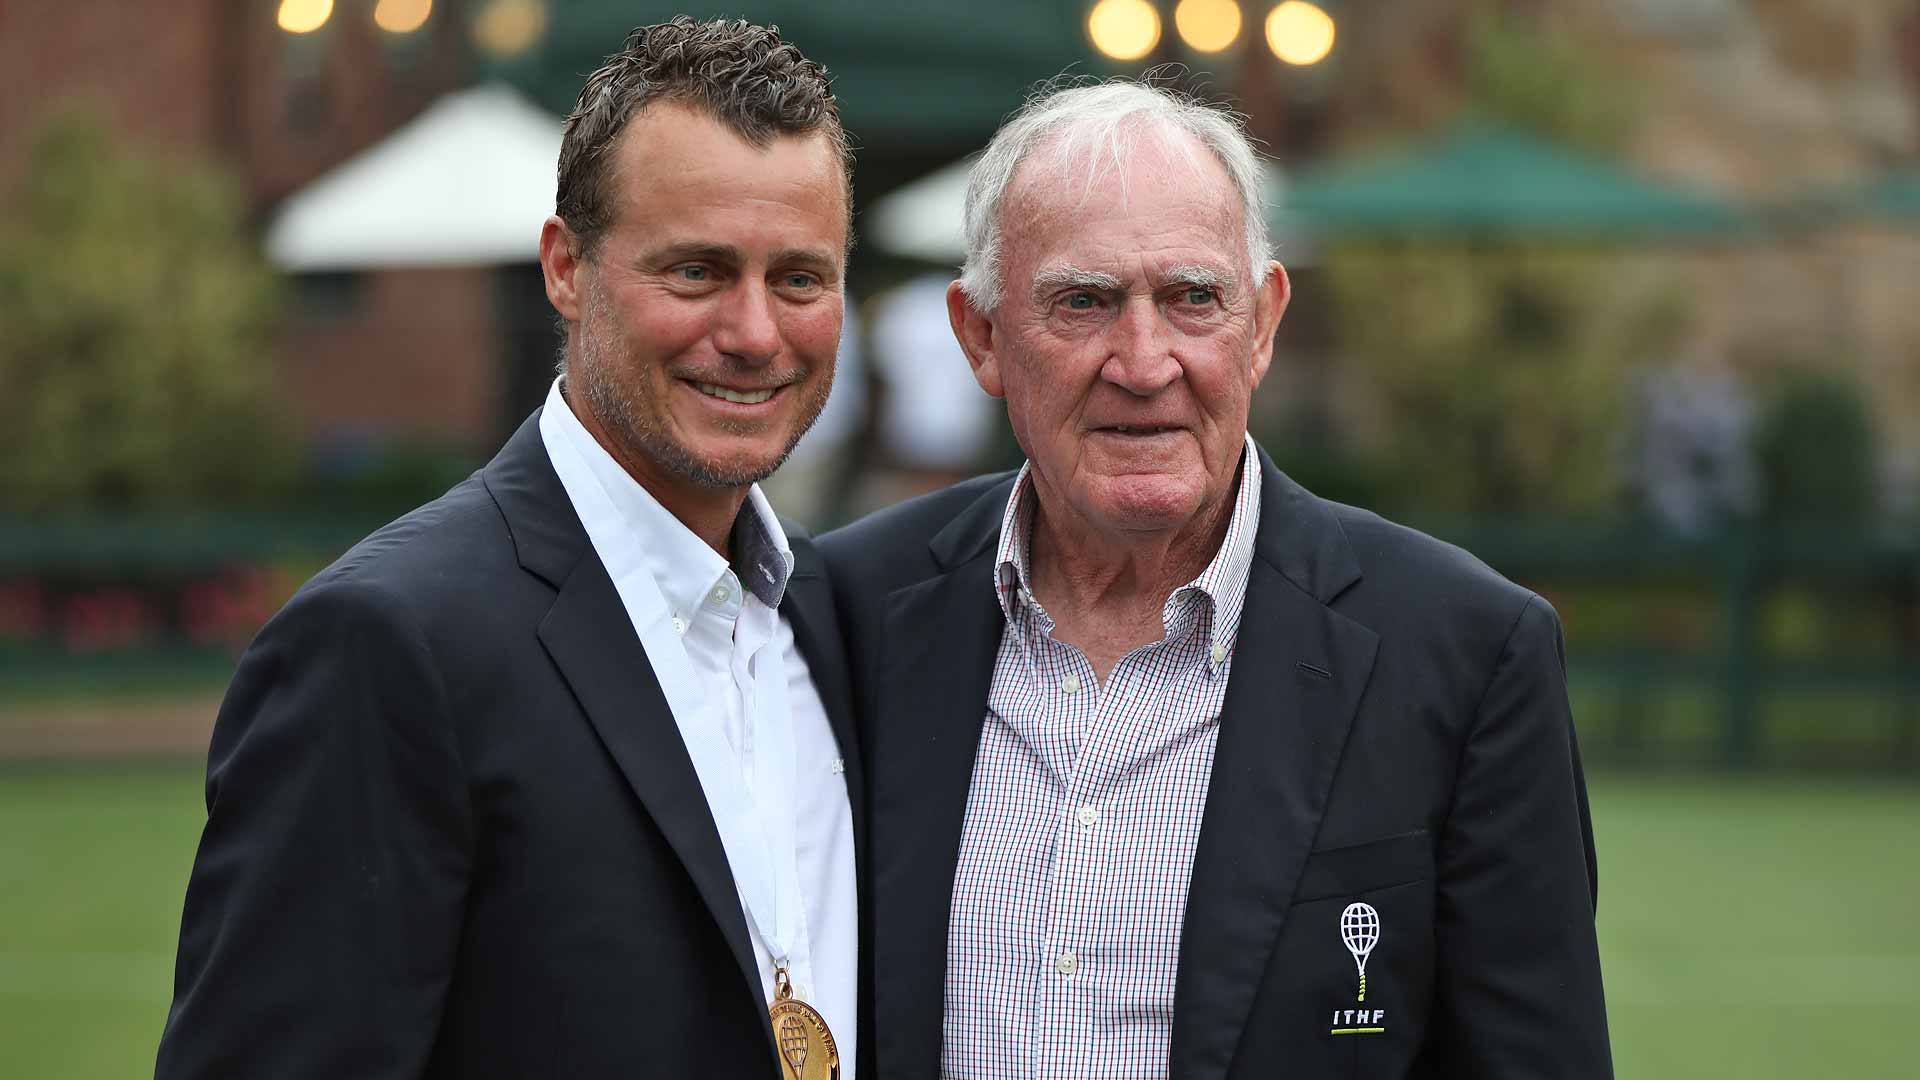 Lleyton Hewitt poses with one of his mentors, Tony Roche